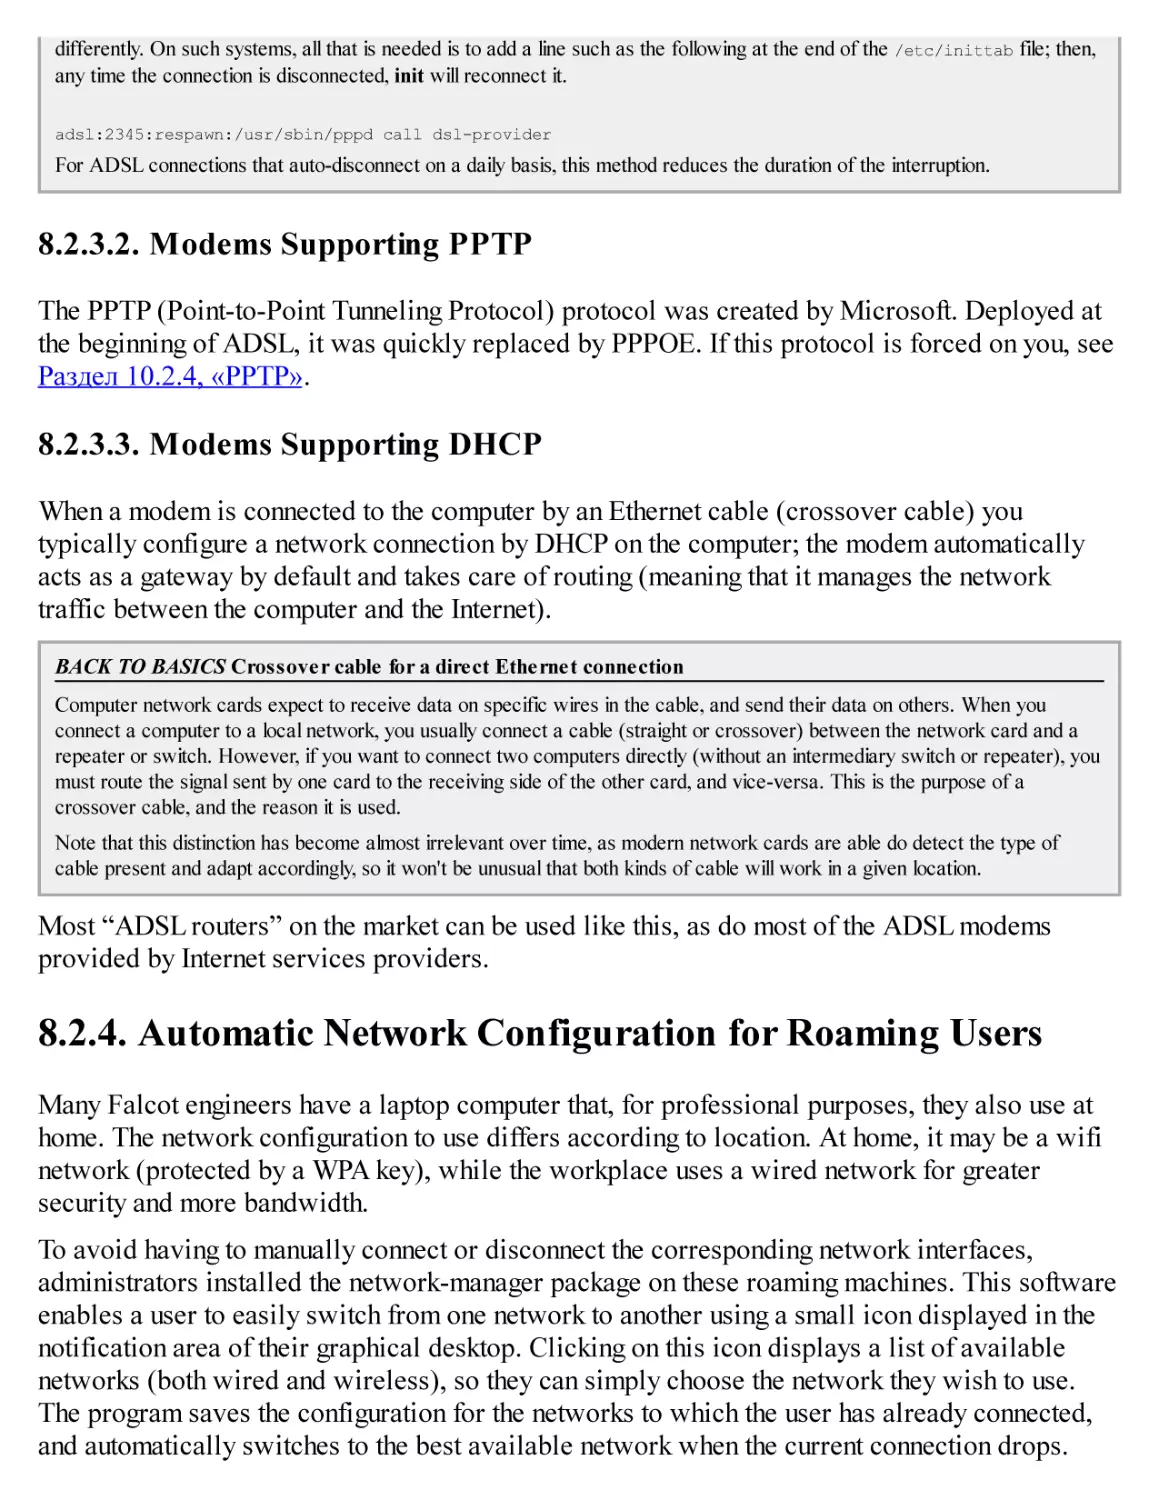 8.2.3.2. Modems Supporting PPTP
8.2.3.3. Modems Supporting DHCP
8.2.4. Automatic Network Configuration for Roaming Users